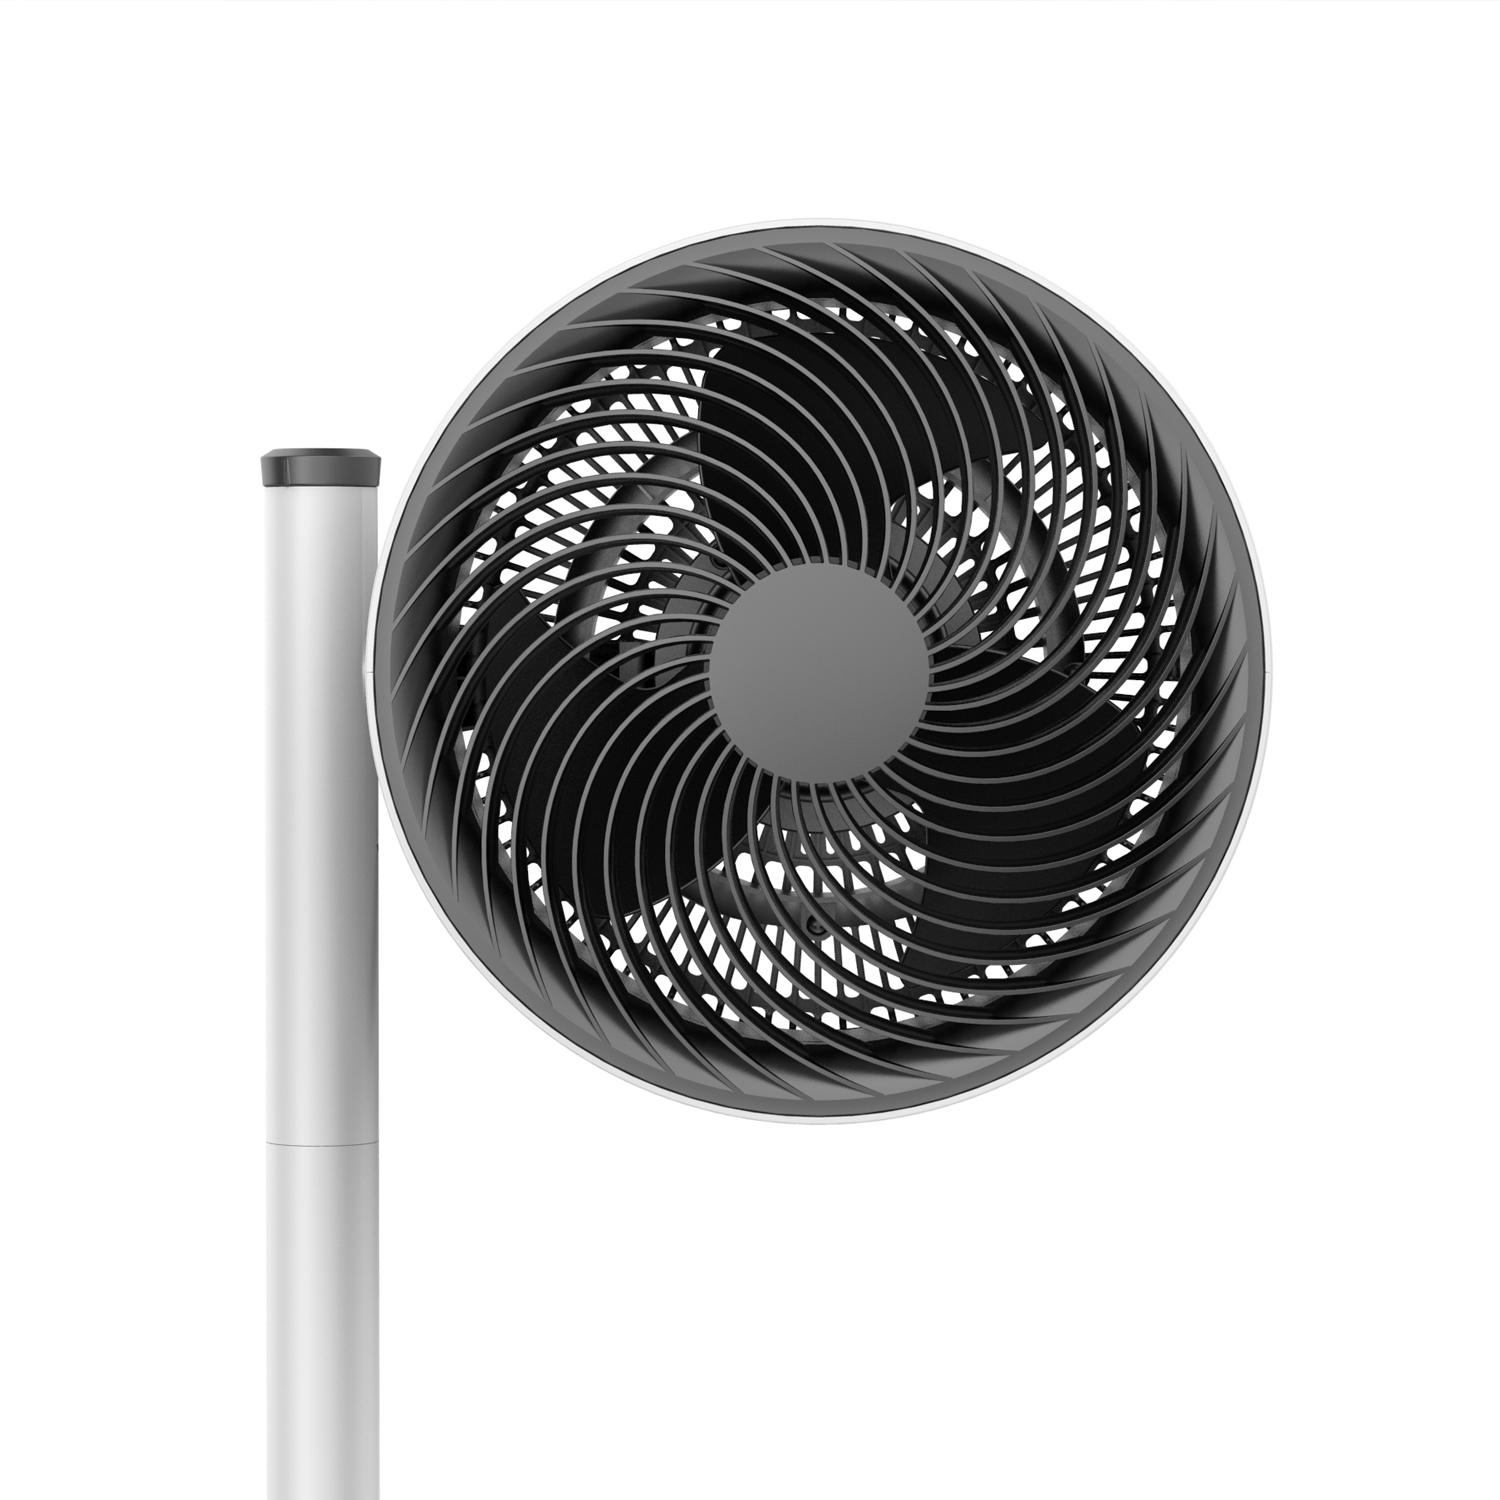 Industrial design of the new domestic fan range for Boneco Healthy Air